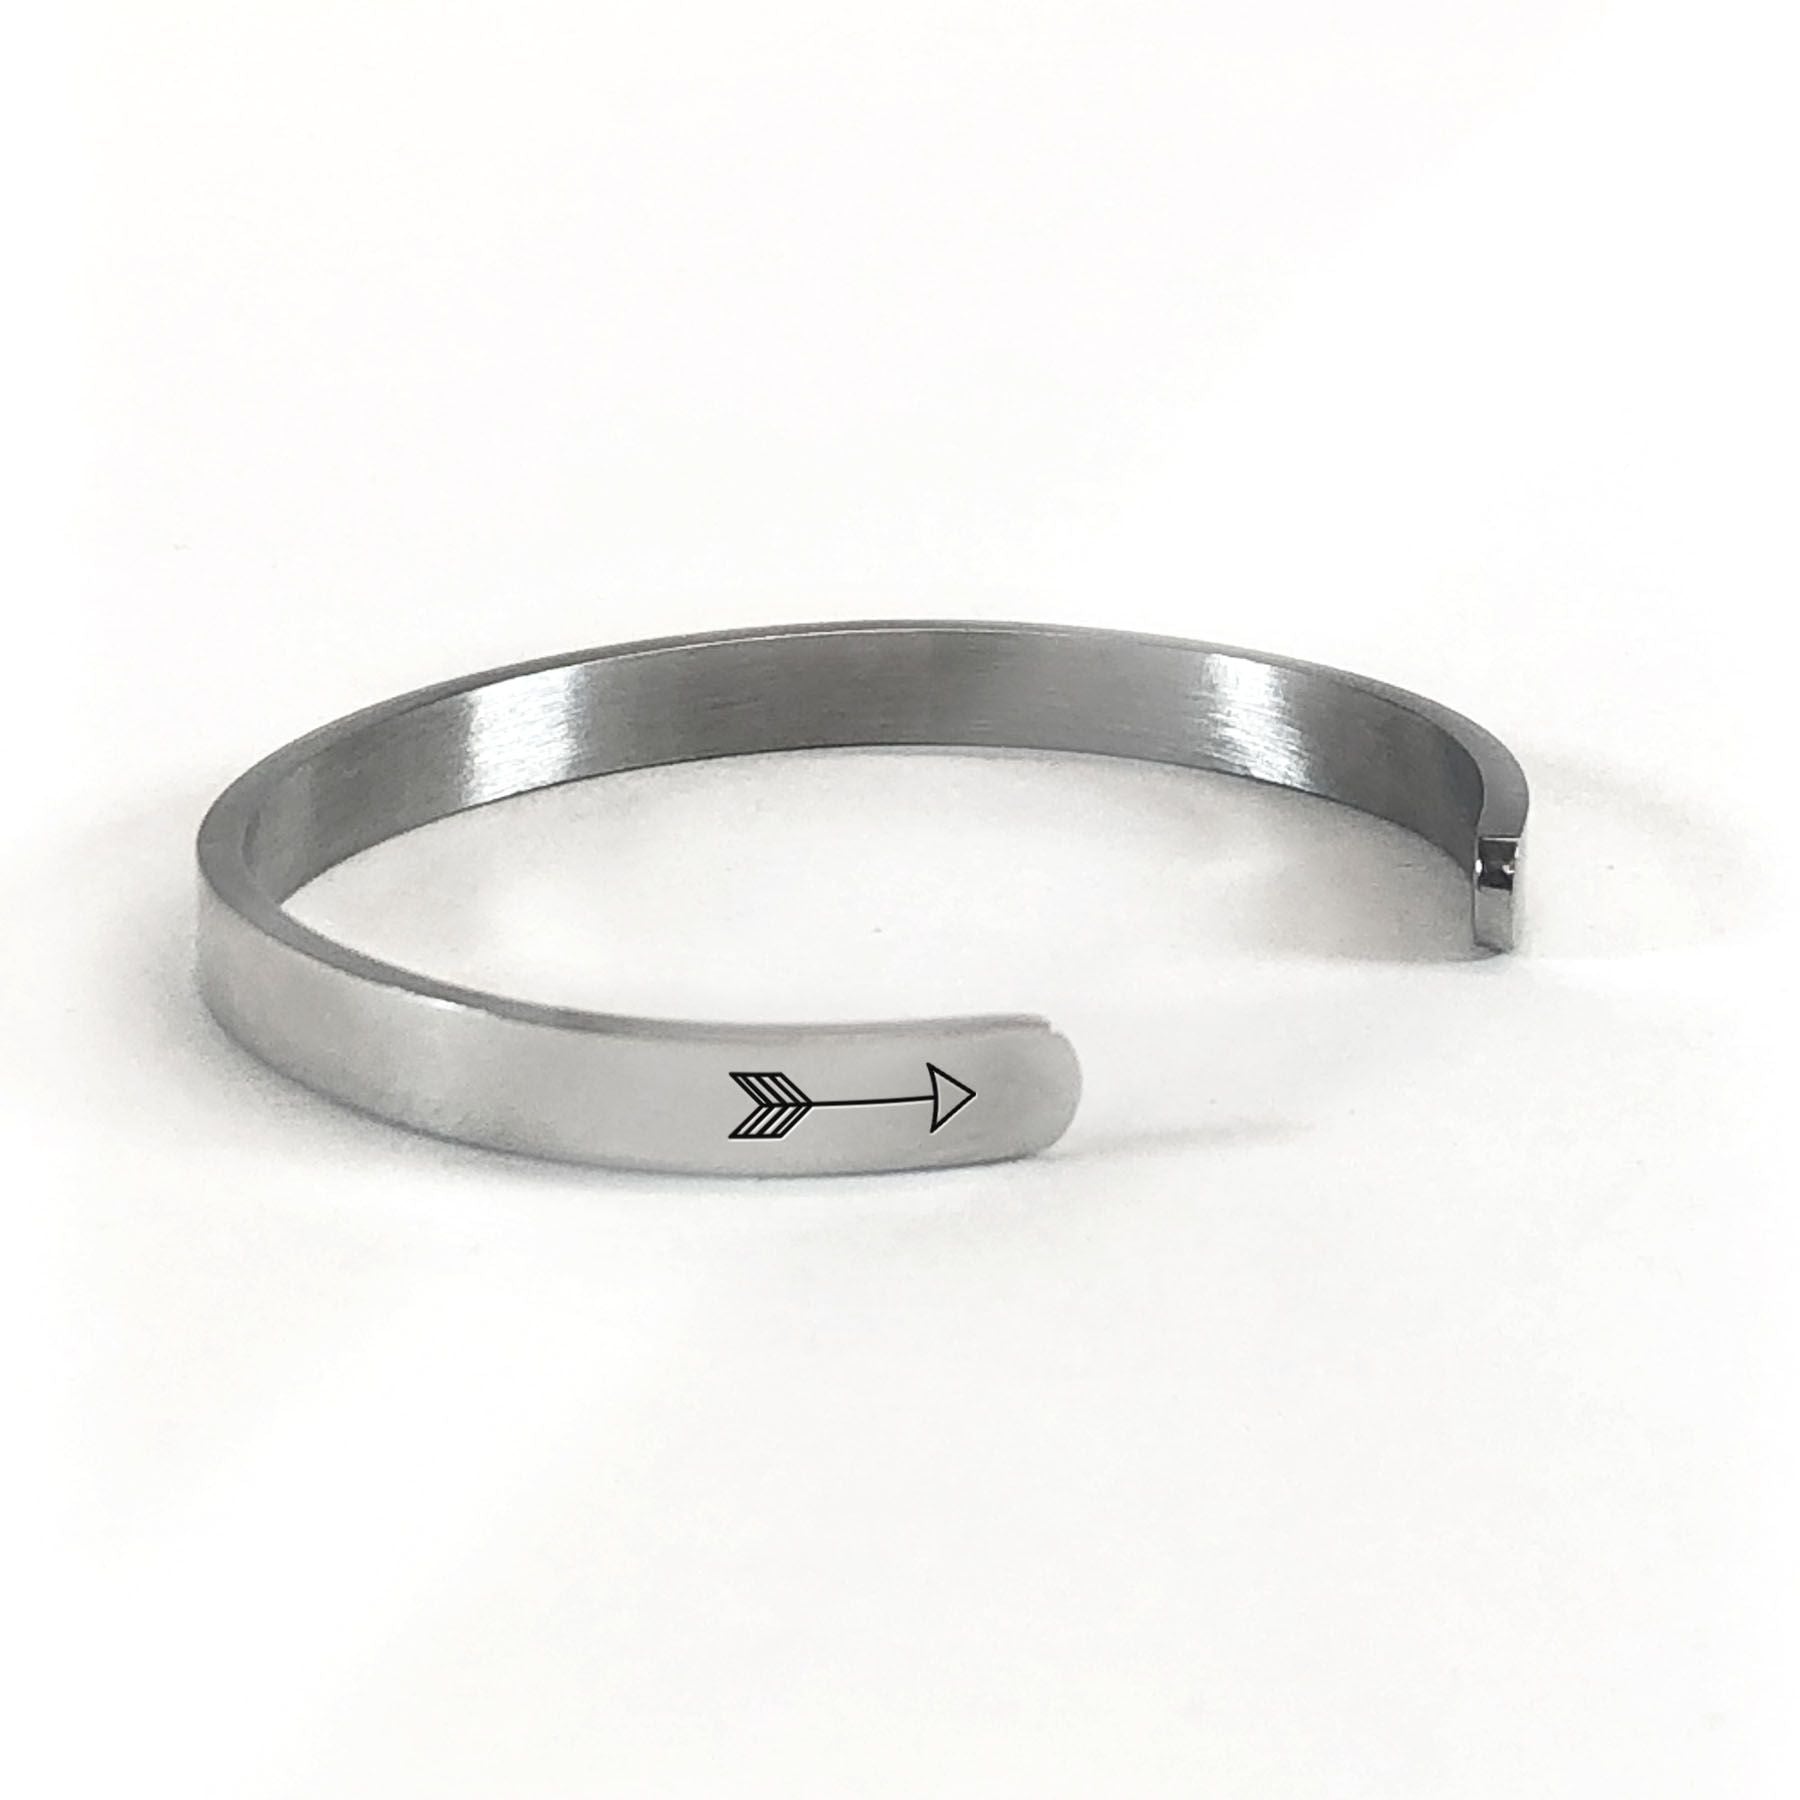 Live what you love bracelet in silver rotated to show arrows and cuff opening